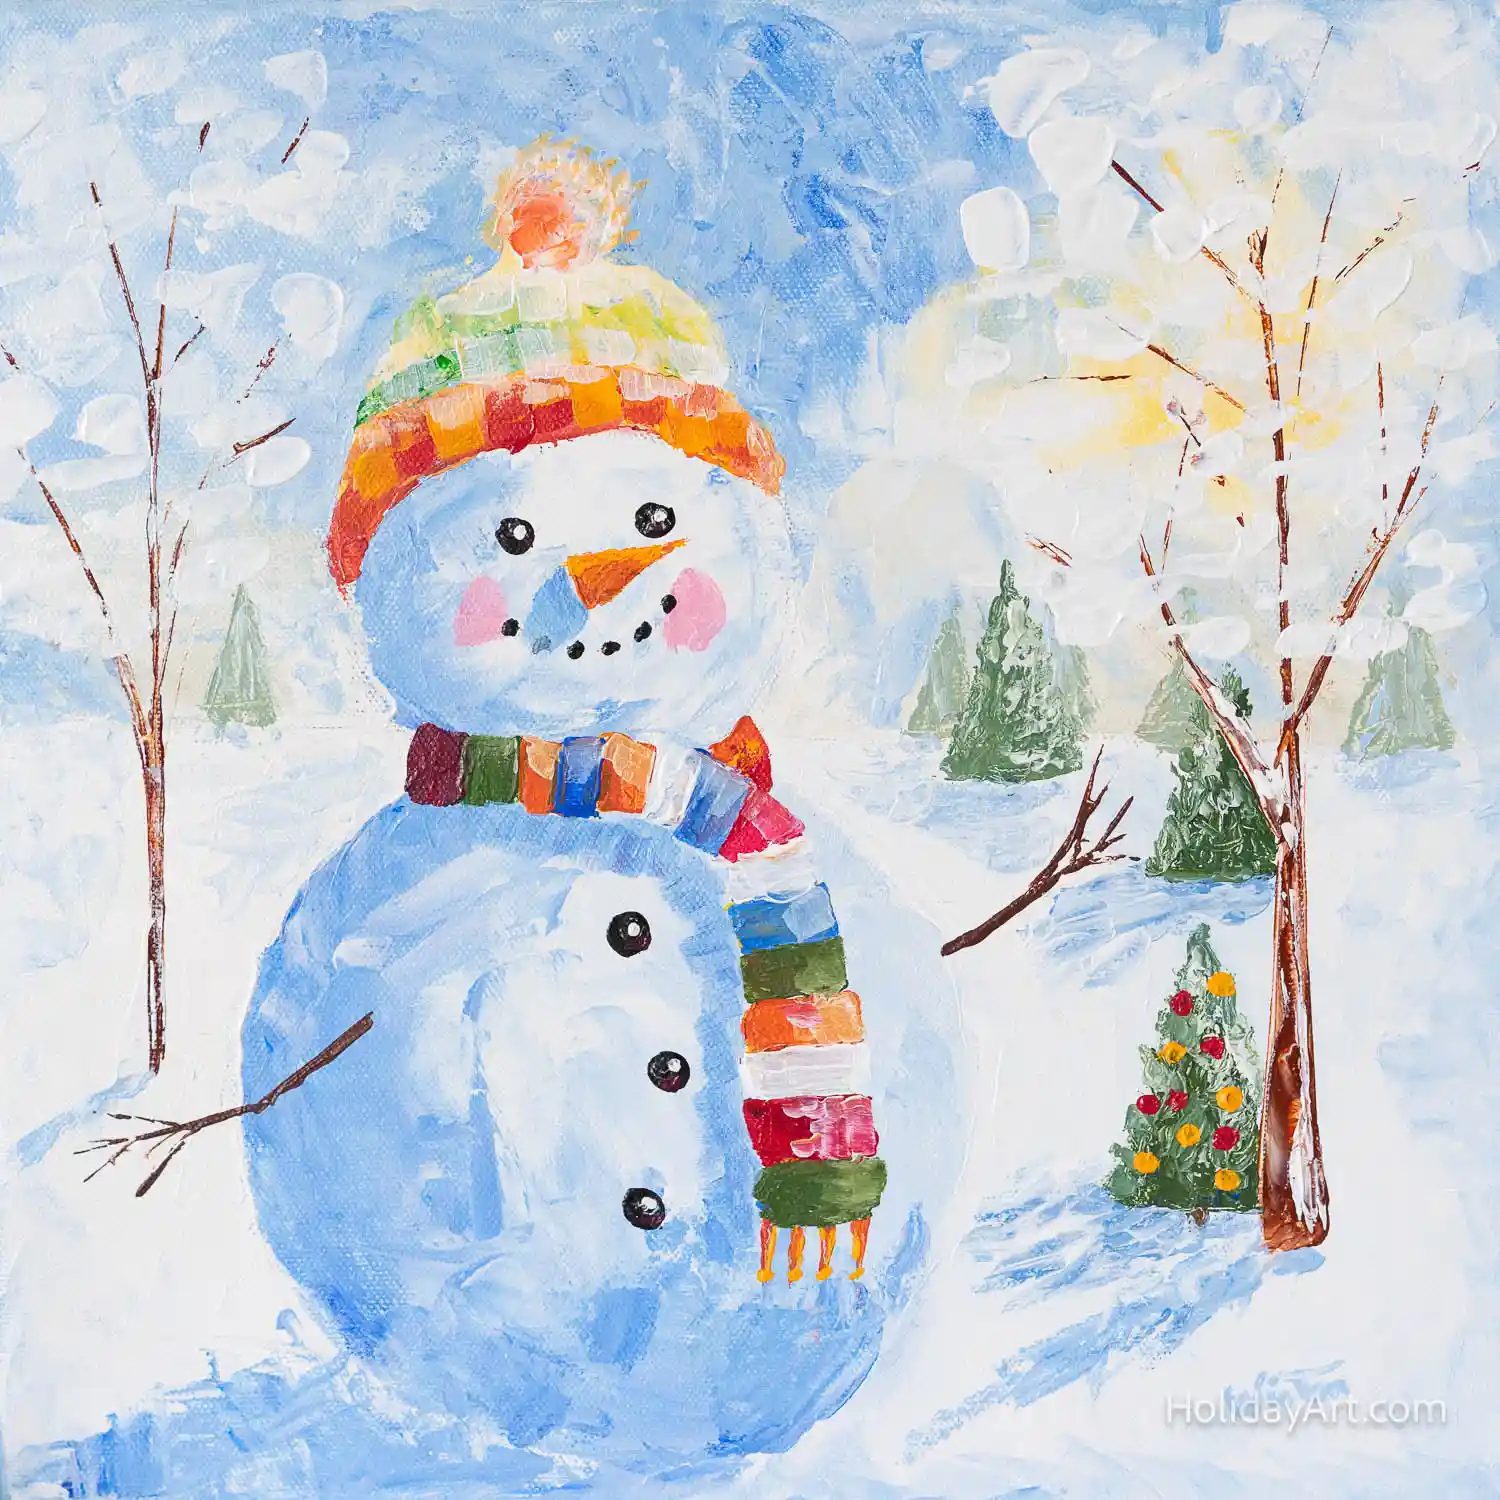 impressionistic painting of snowman next to a small Christmas tree